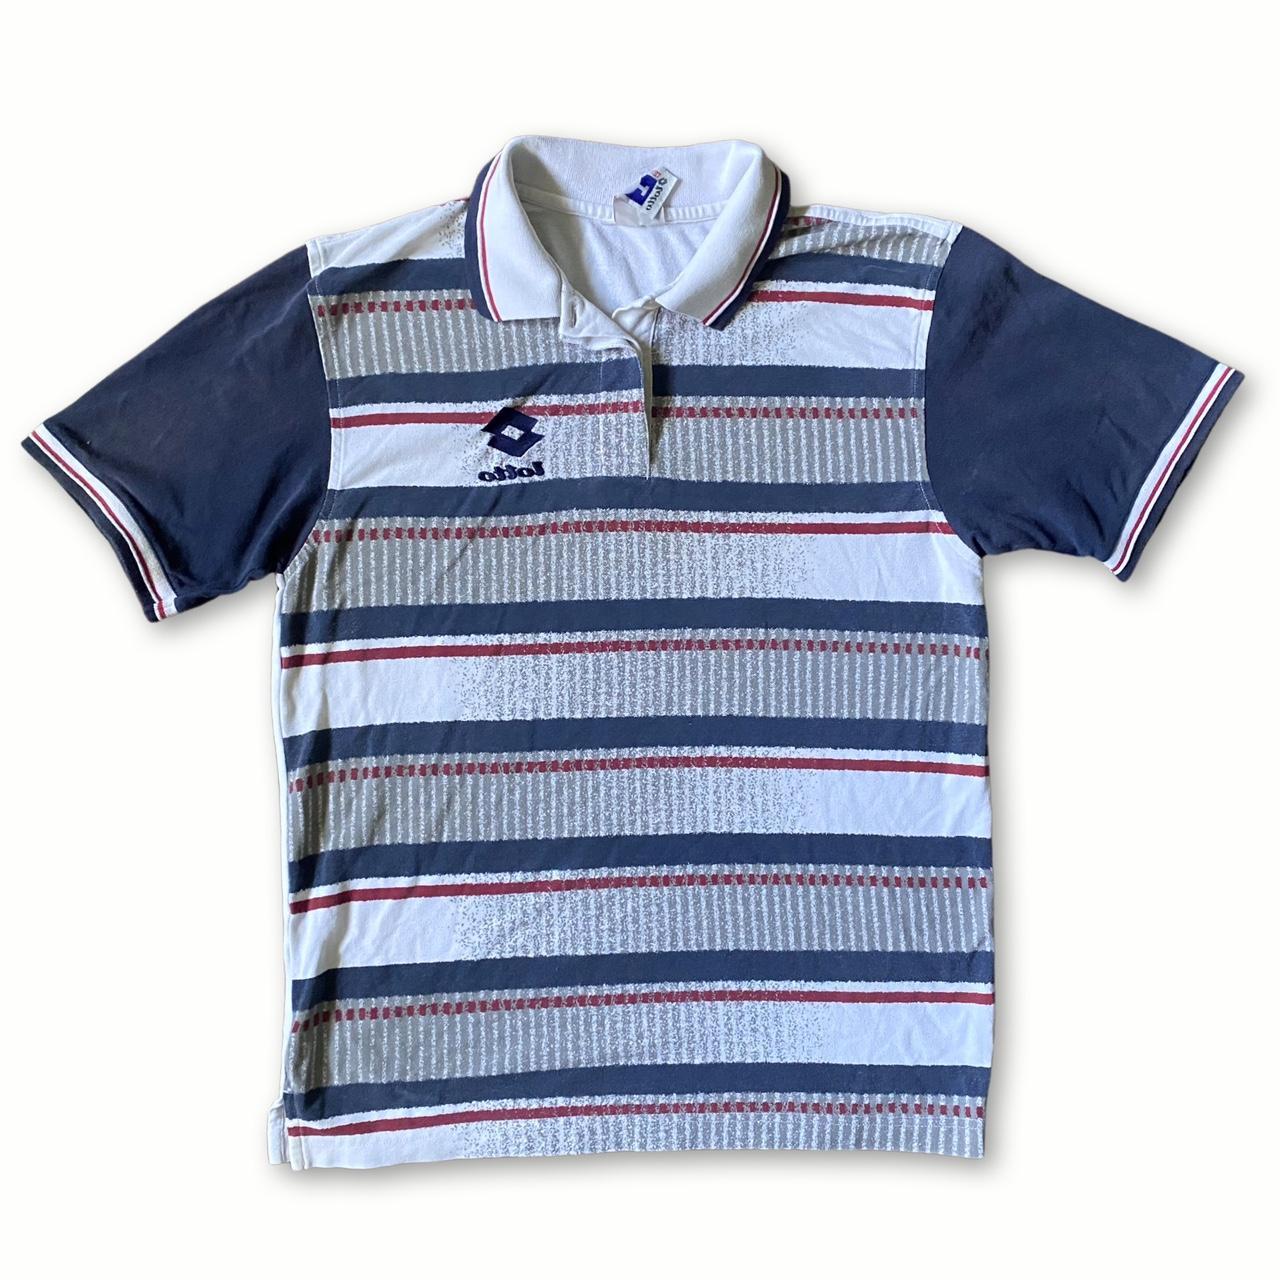 Product Image 1 - Lotto Tennis Polo

Used, no flaws,